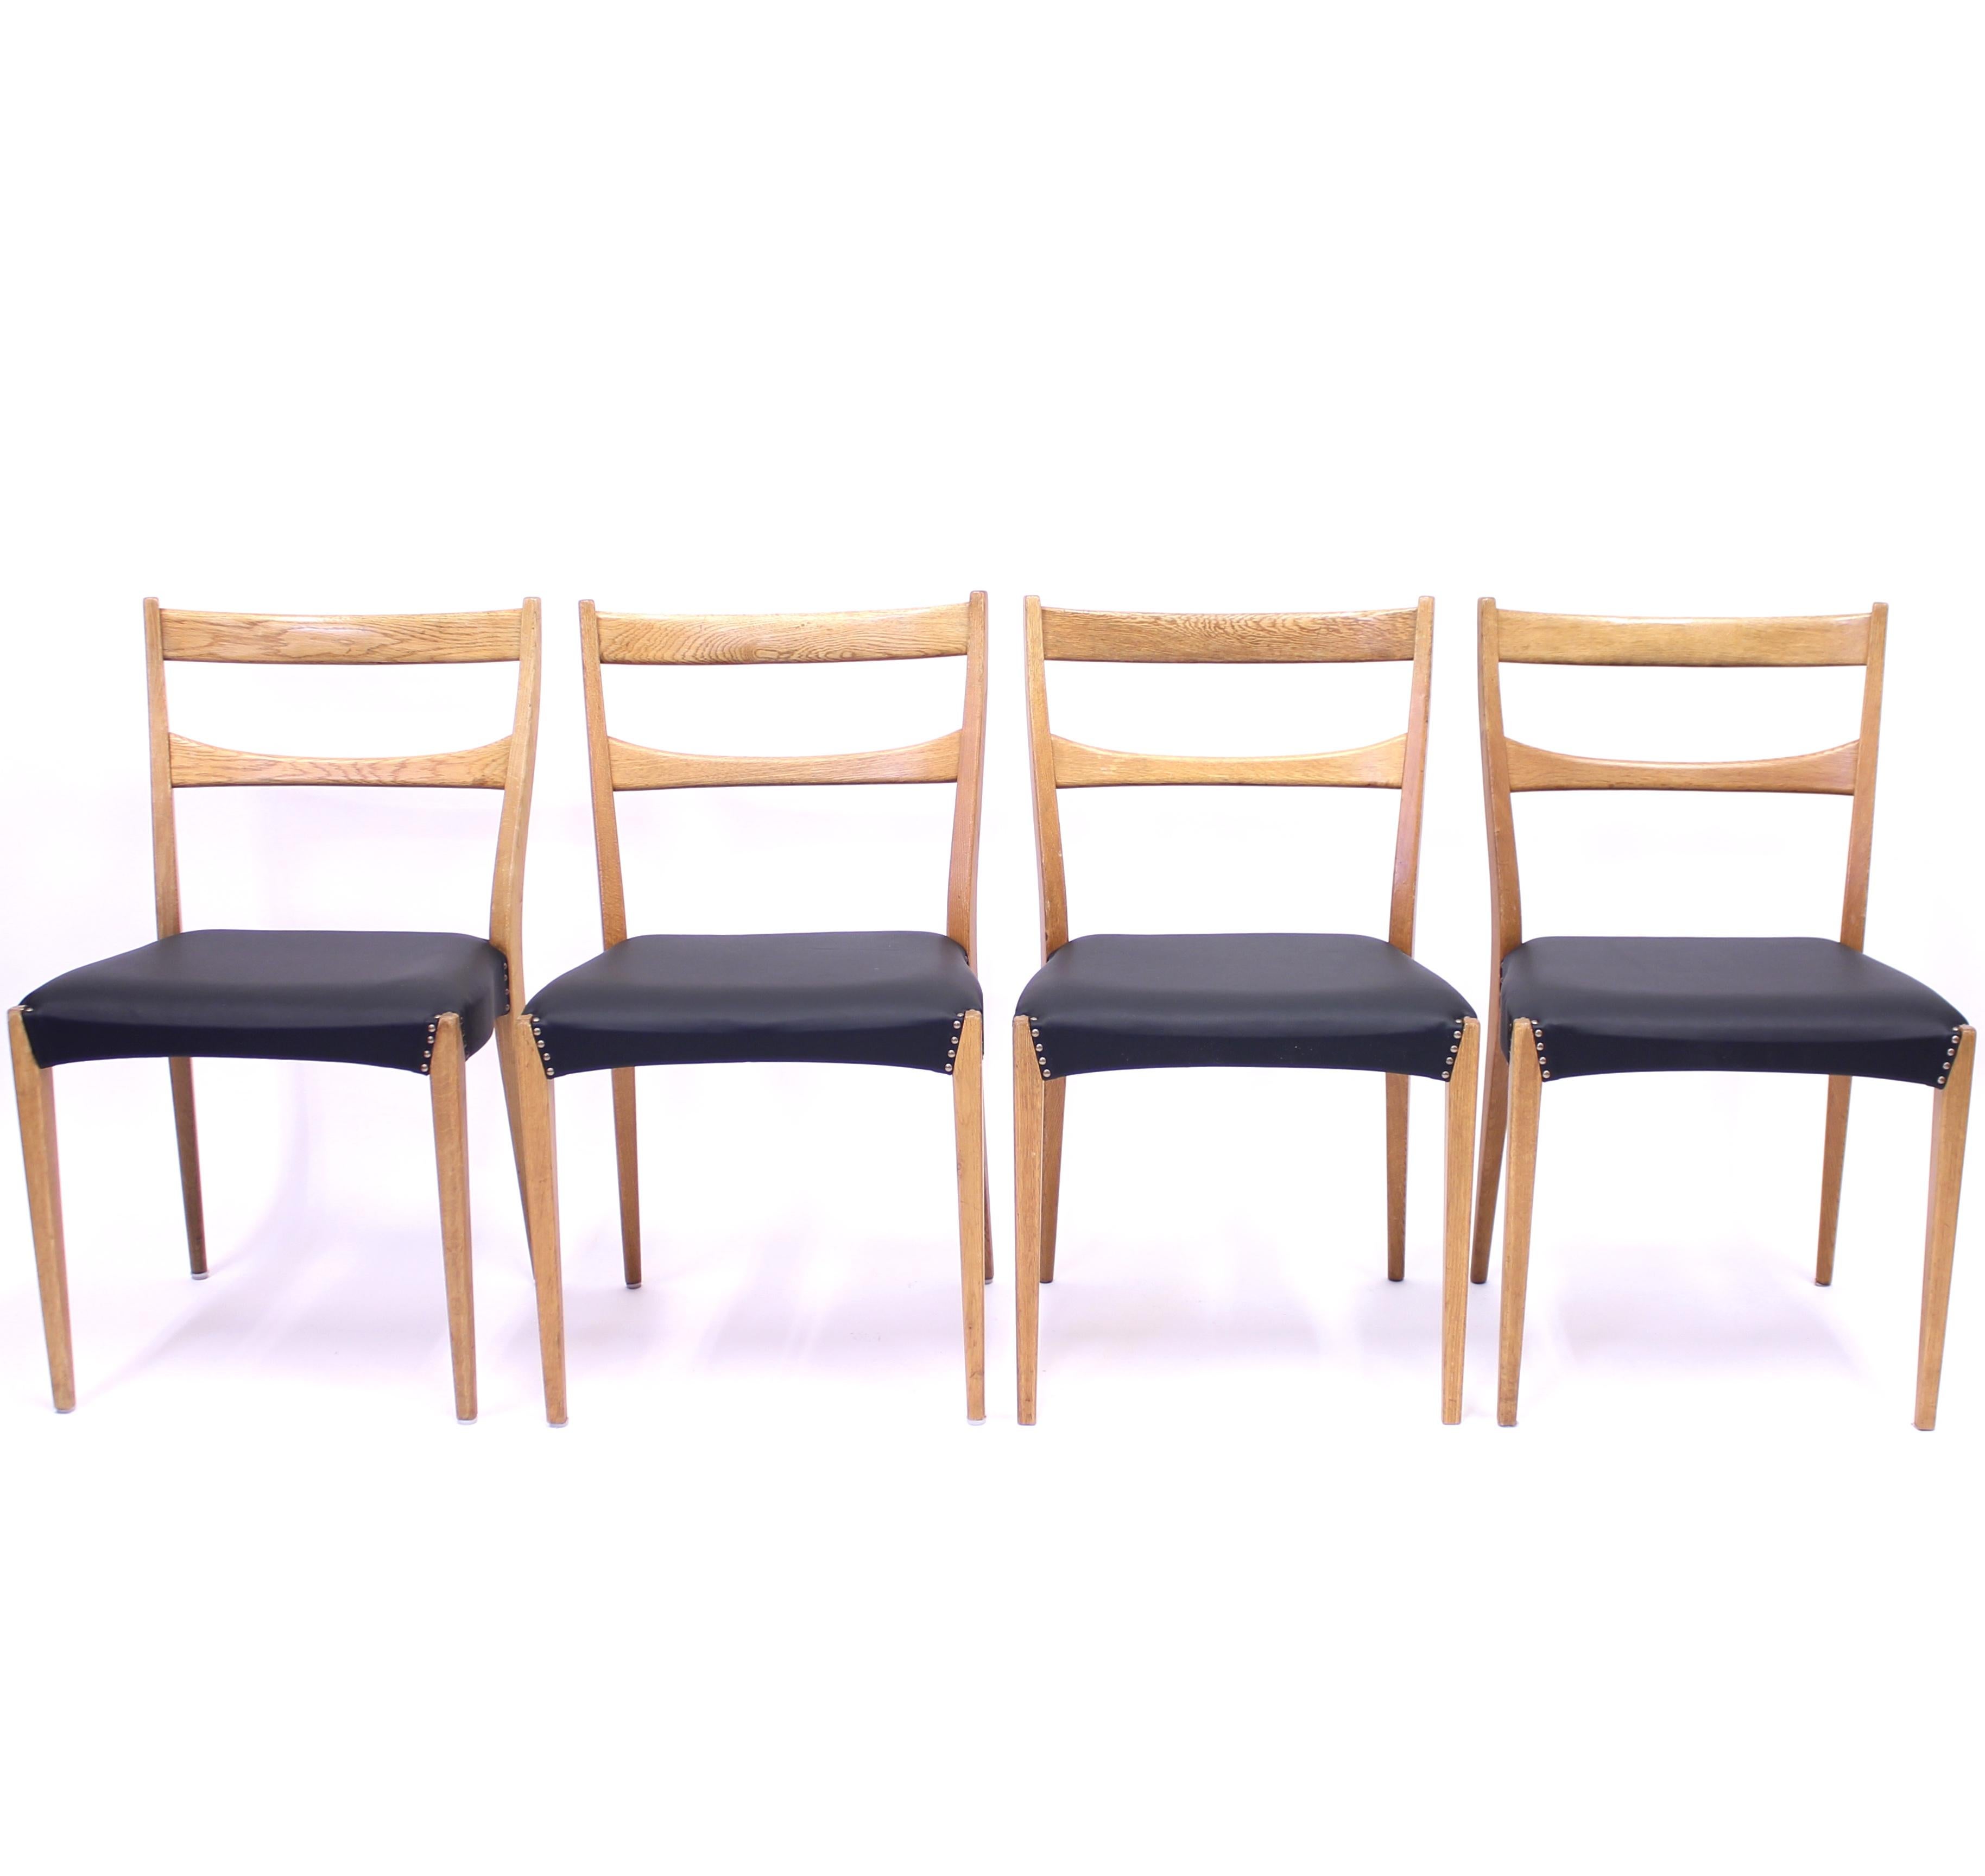 Scandinavian oak dining chairs in the style of Josef Frank for Svenskt Tenn, most likely Swedish, from the midcentury with new black leather seats. Light in appearance due to the nicely designed neat frame. Good vintage condition with light ware on